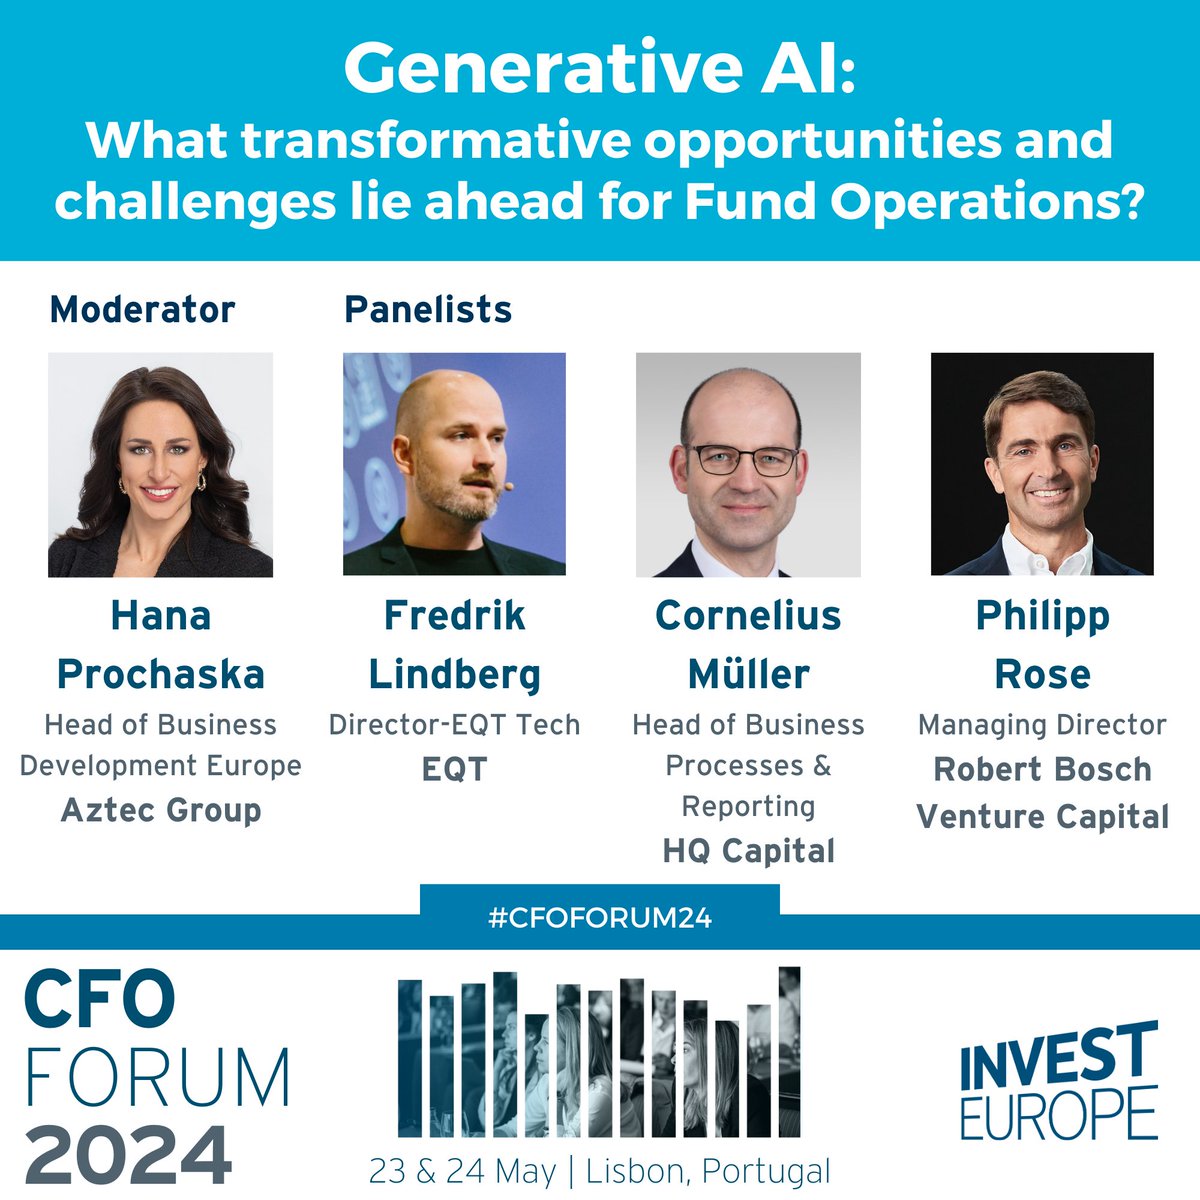 Generative AI: what transformative opportunities and challenges lie ahead for Fund Operations? Our panel at #CFOForum24 looks at the future impacts of #AI adoption in #privateequity and #venturecapital. Register now and get inspired! 10% discount 👉 cfo.investeurope.eu/registration/